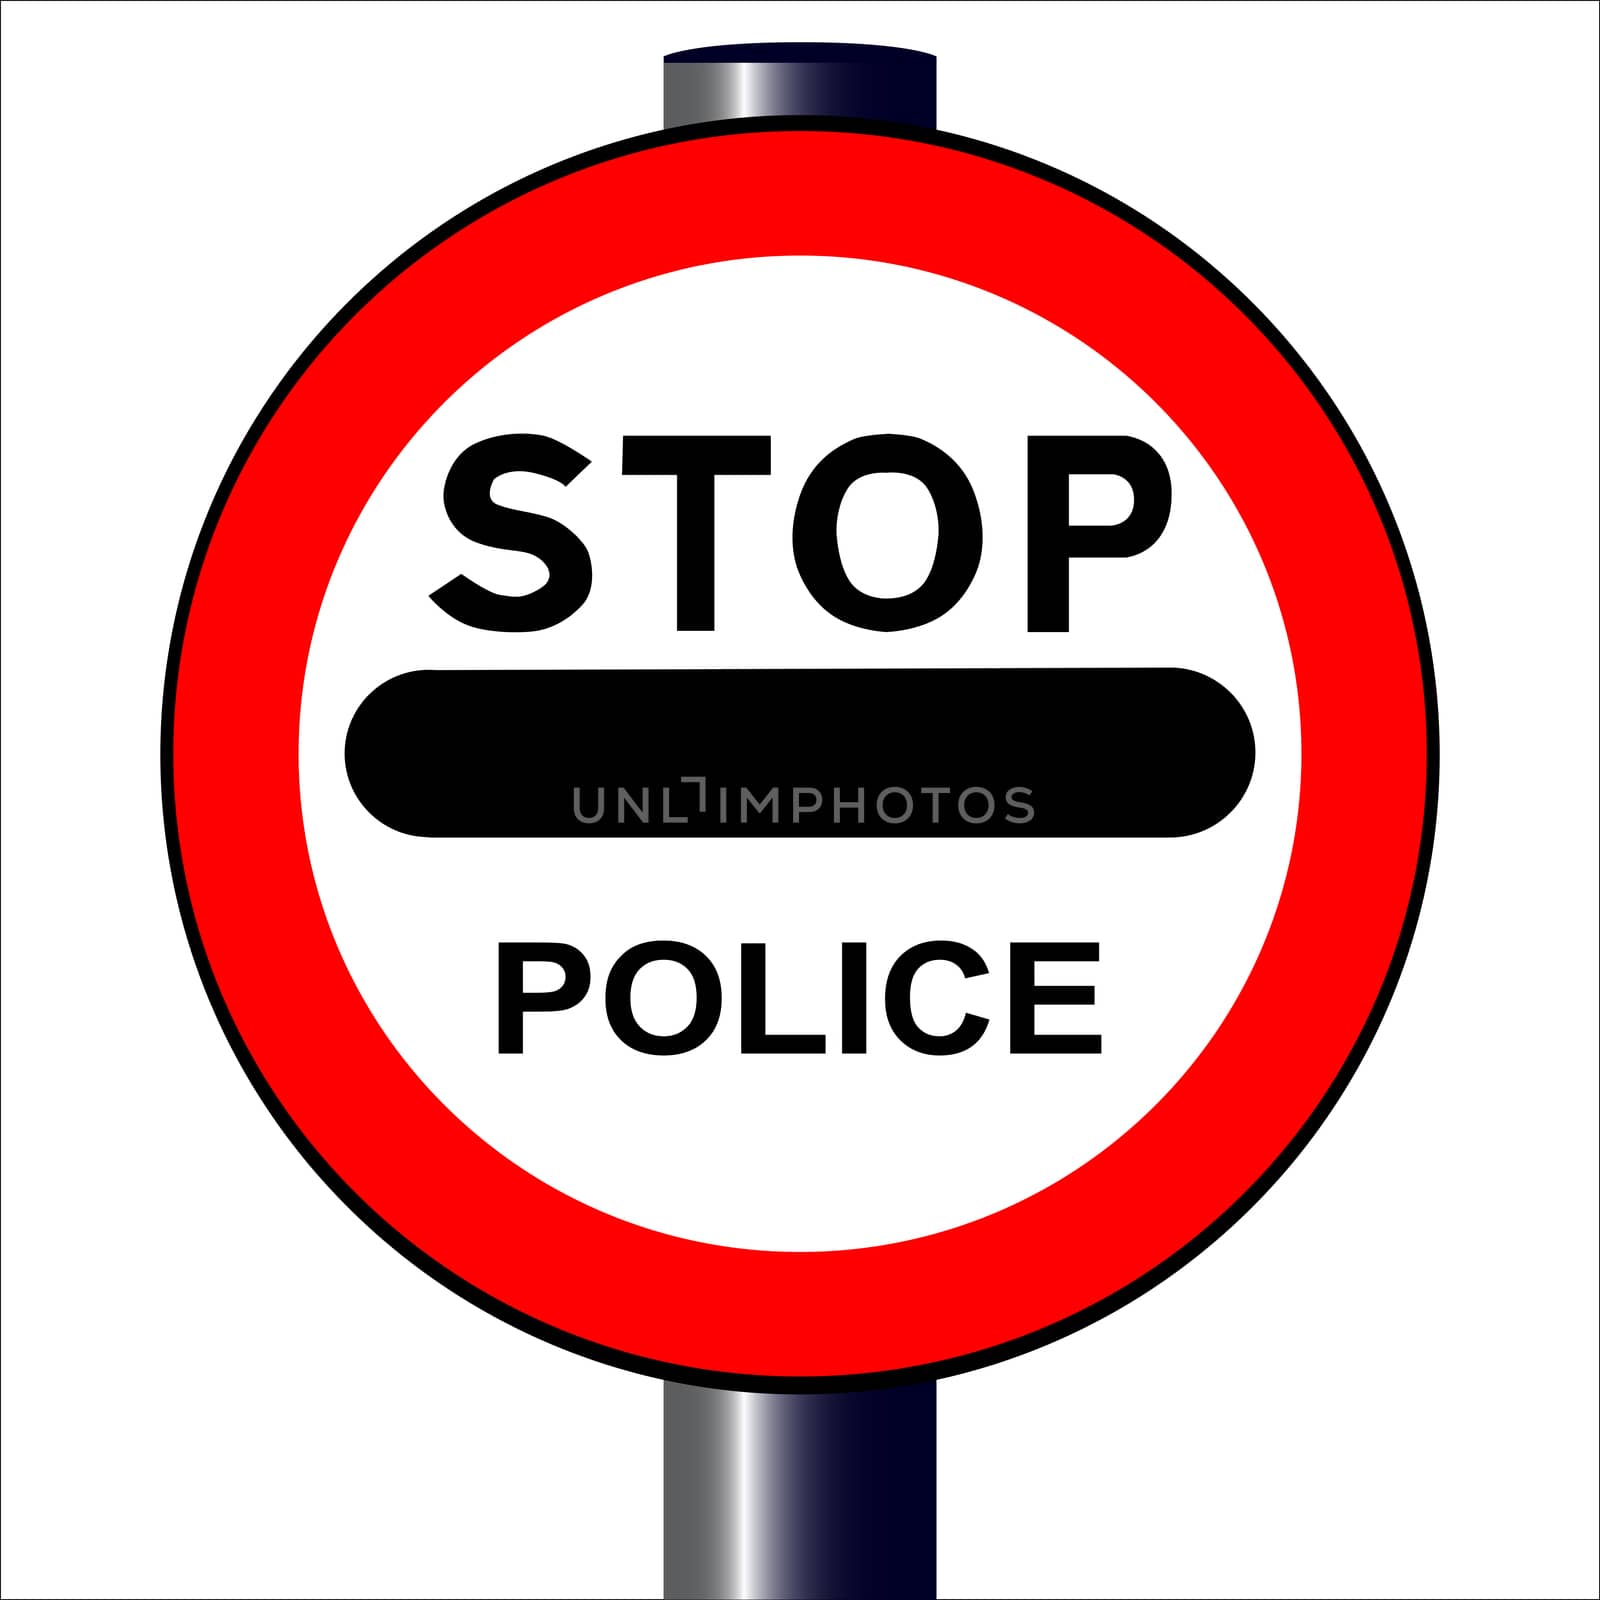 A police stop sign over a white background